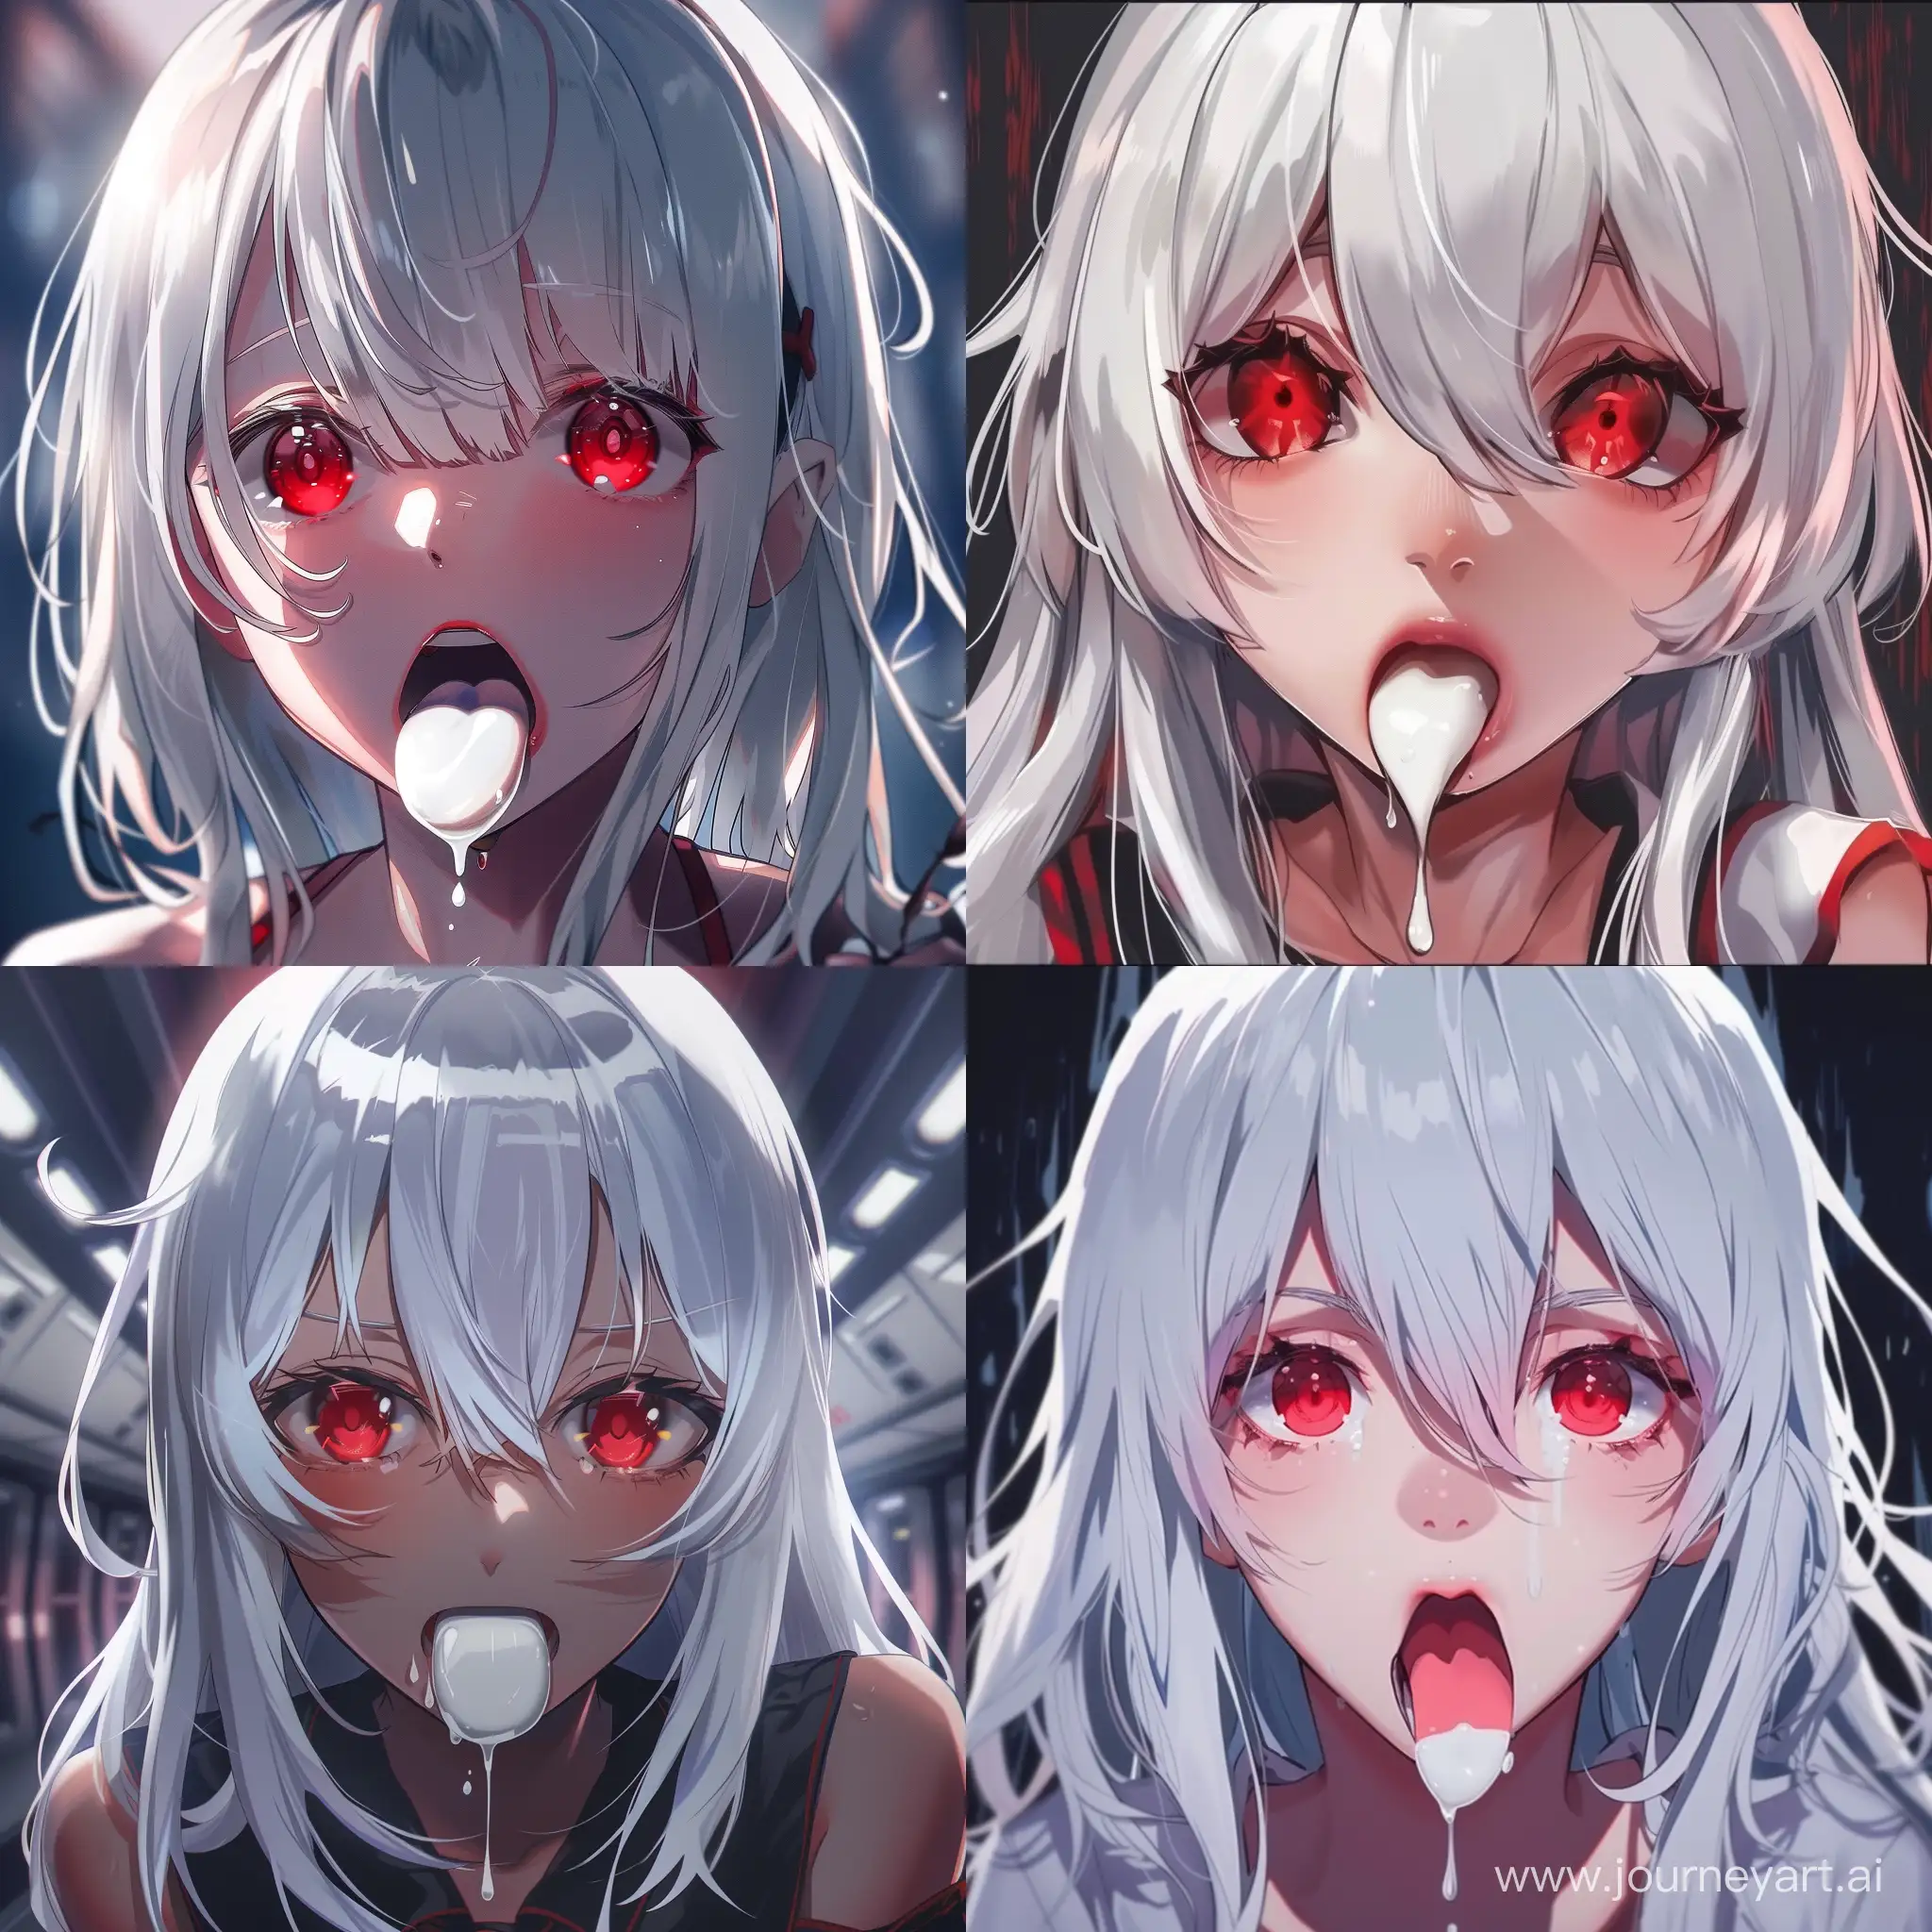 anime girl with white hair and red eyes, Stick out tongue and rolled eyes, with white liquid on tongue